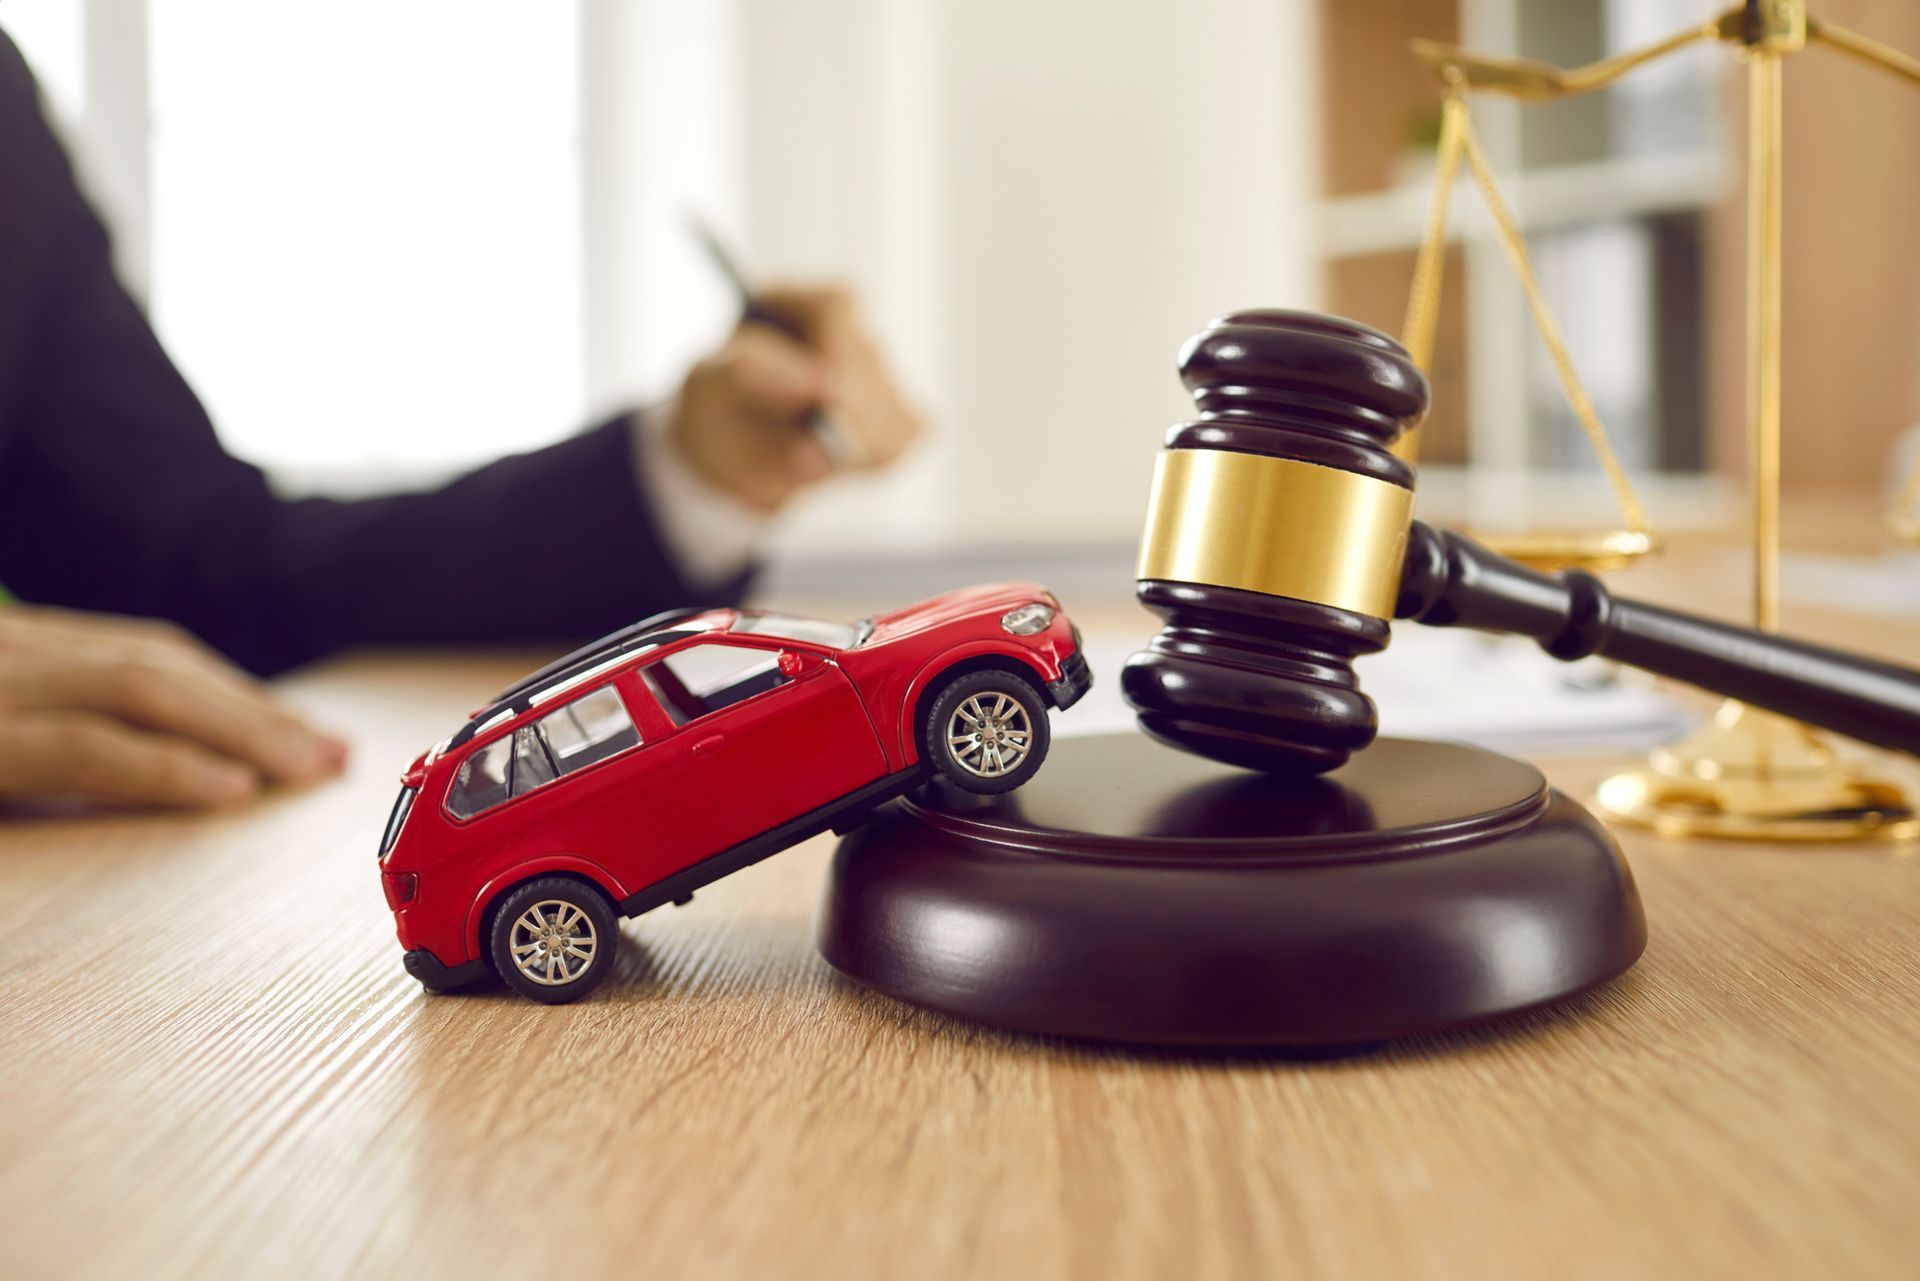 Little red toy automobile on table with sound block and gavel